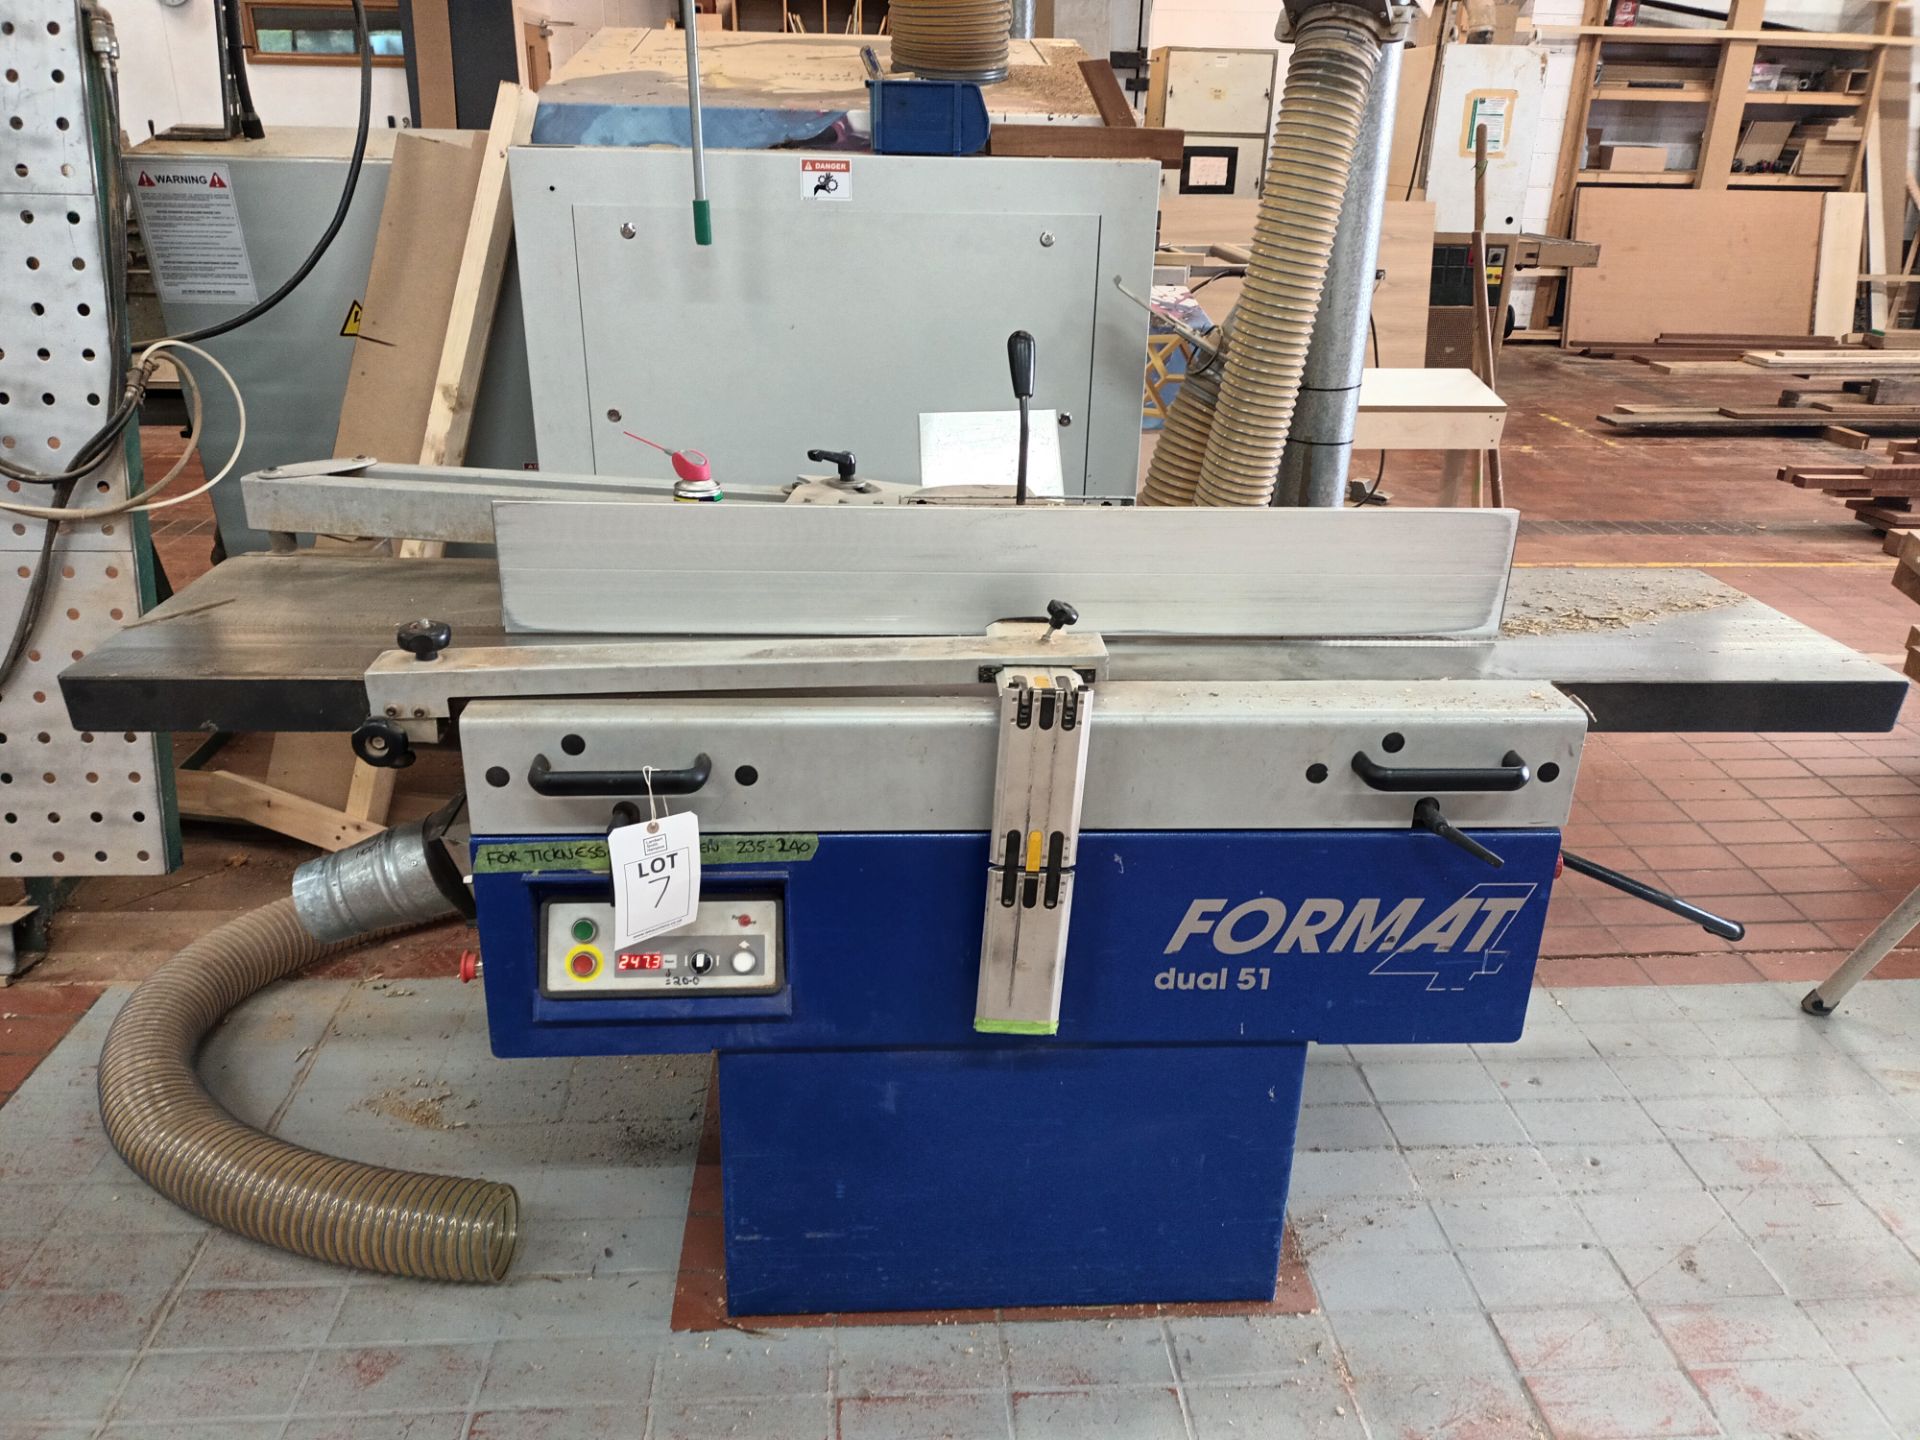 Format dual 51 planer/thicknesser (2006) NB: this item has no CE marking. The Purchaser is